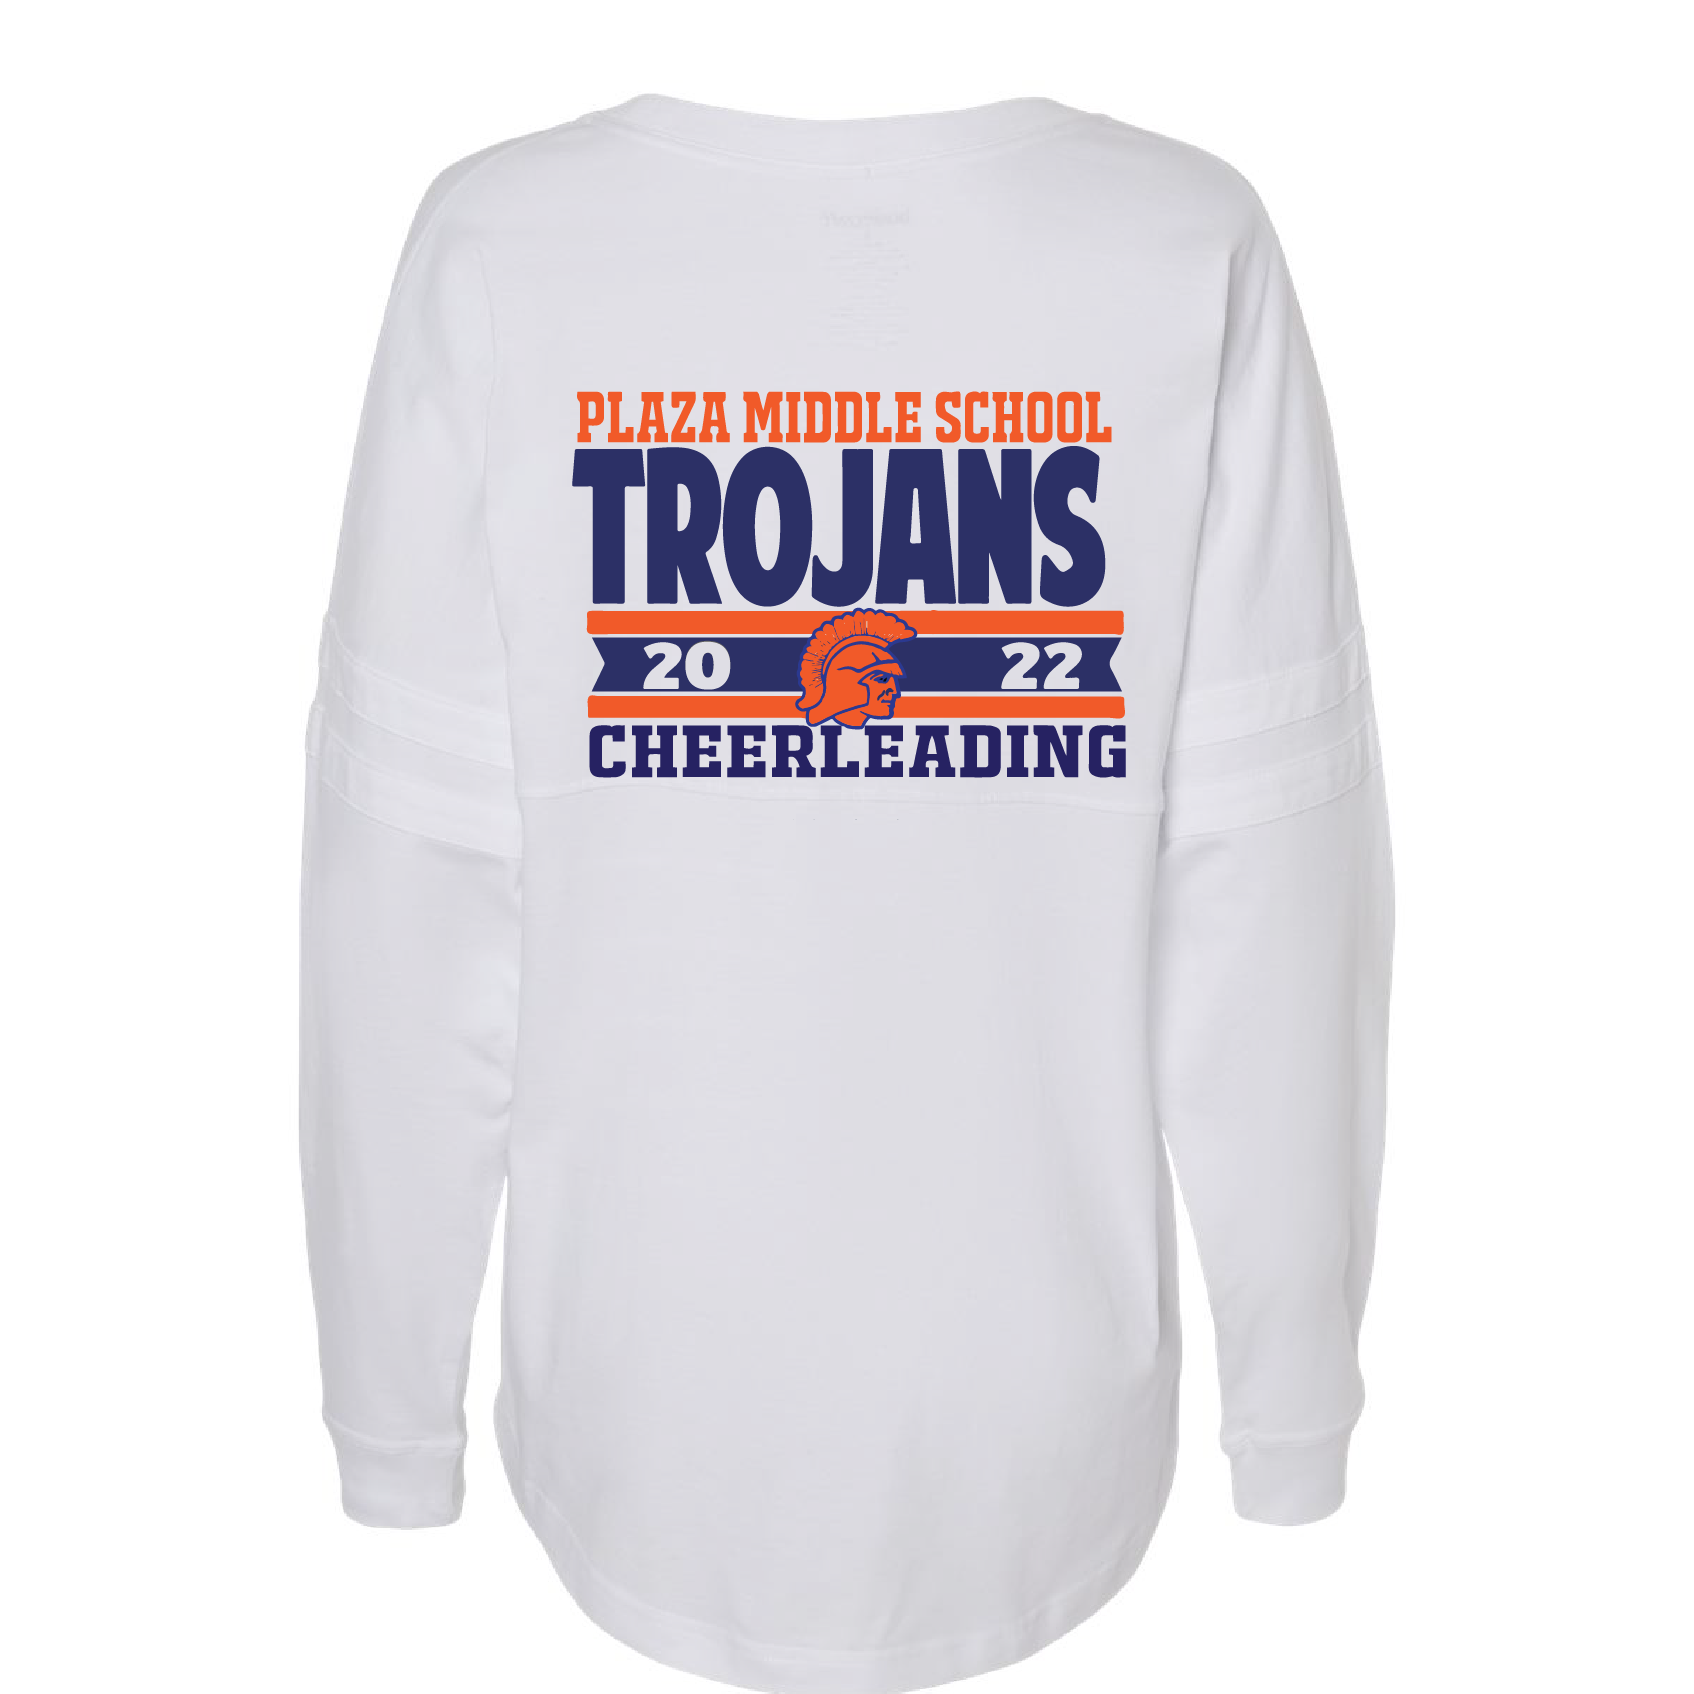 Women's Jersey Pom Pom Long Sleeve T-Shirt / White / Plaza Middle Cheer